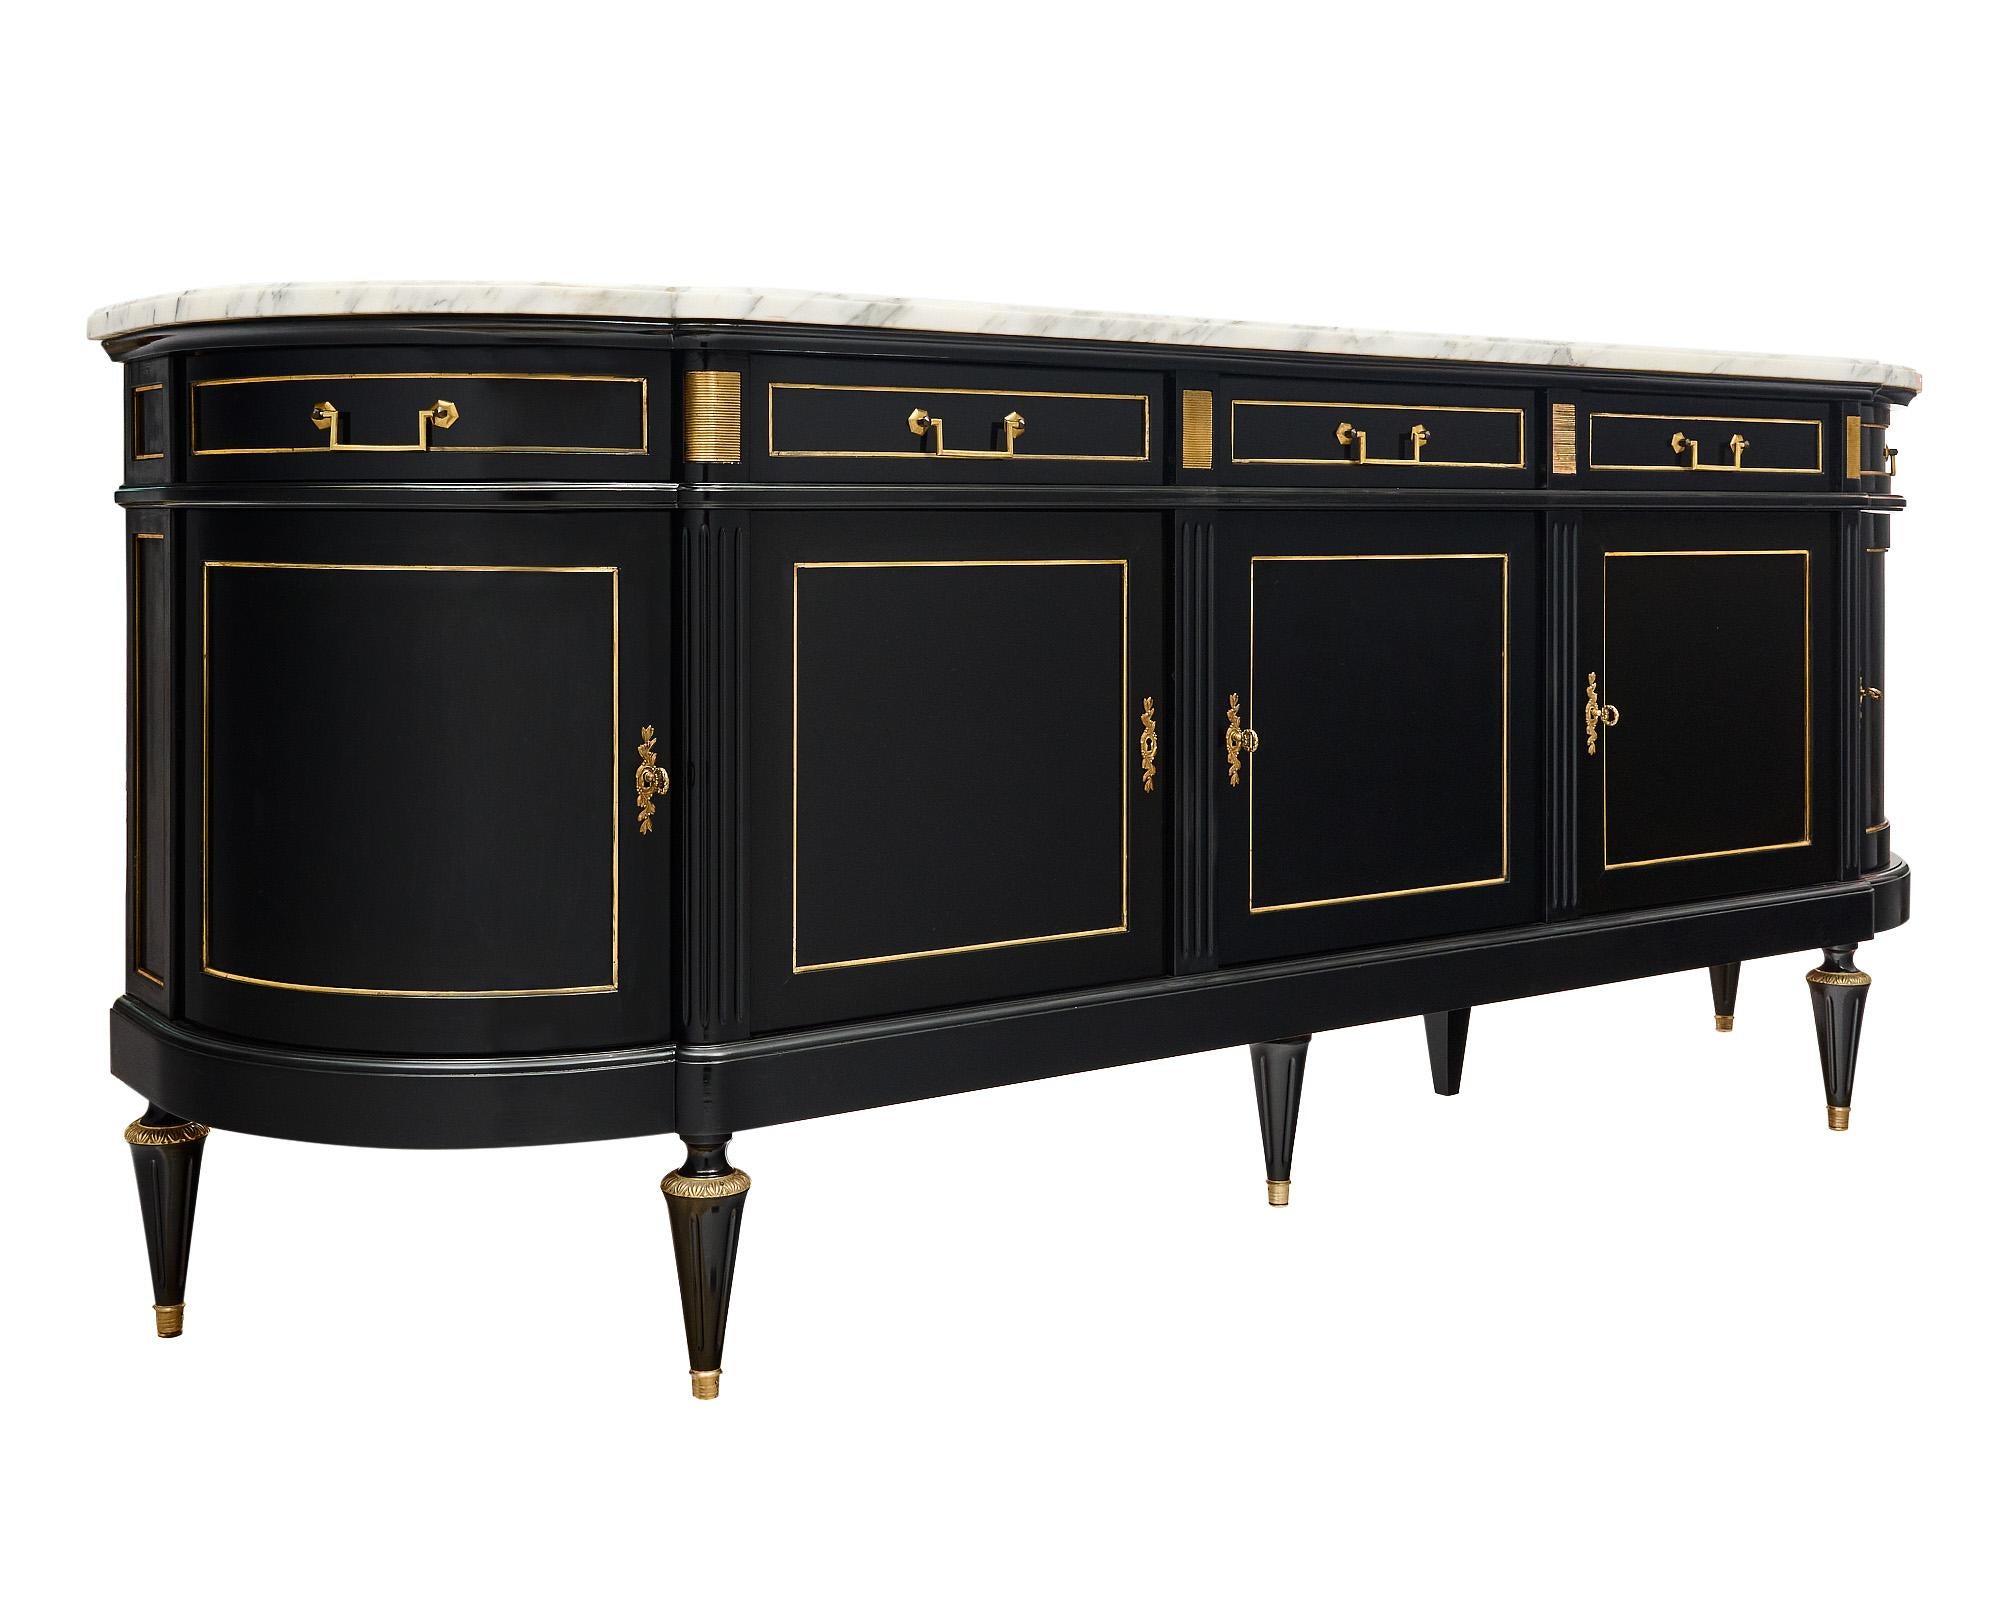 Buffet or enfilade from France made of a solid mahogany that has been finished in a museum-quality French polish for a lustrous effect. There are five doors that open to interior shelving and five dovetailed drawers. The ends have curved doors and